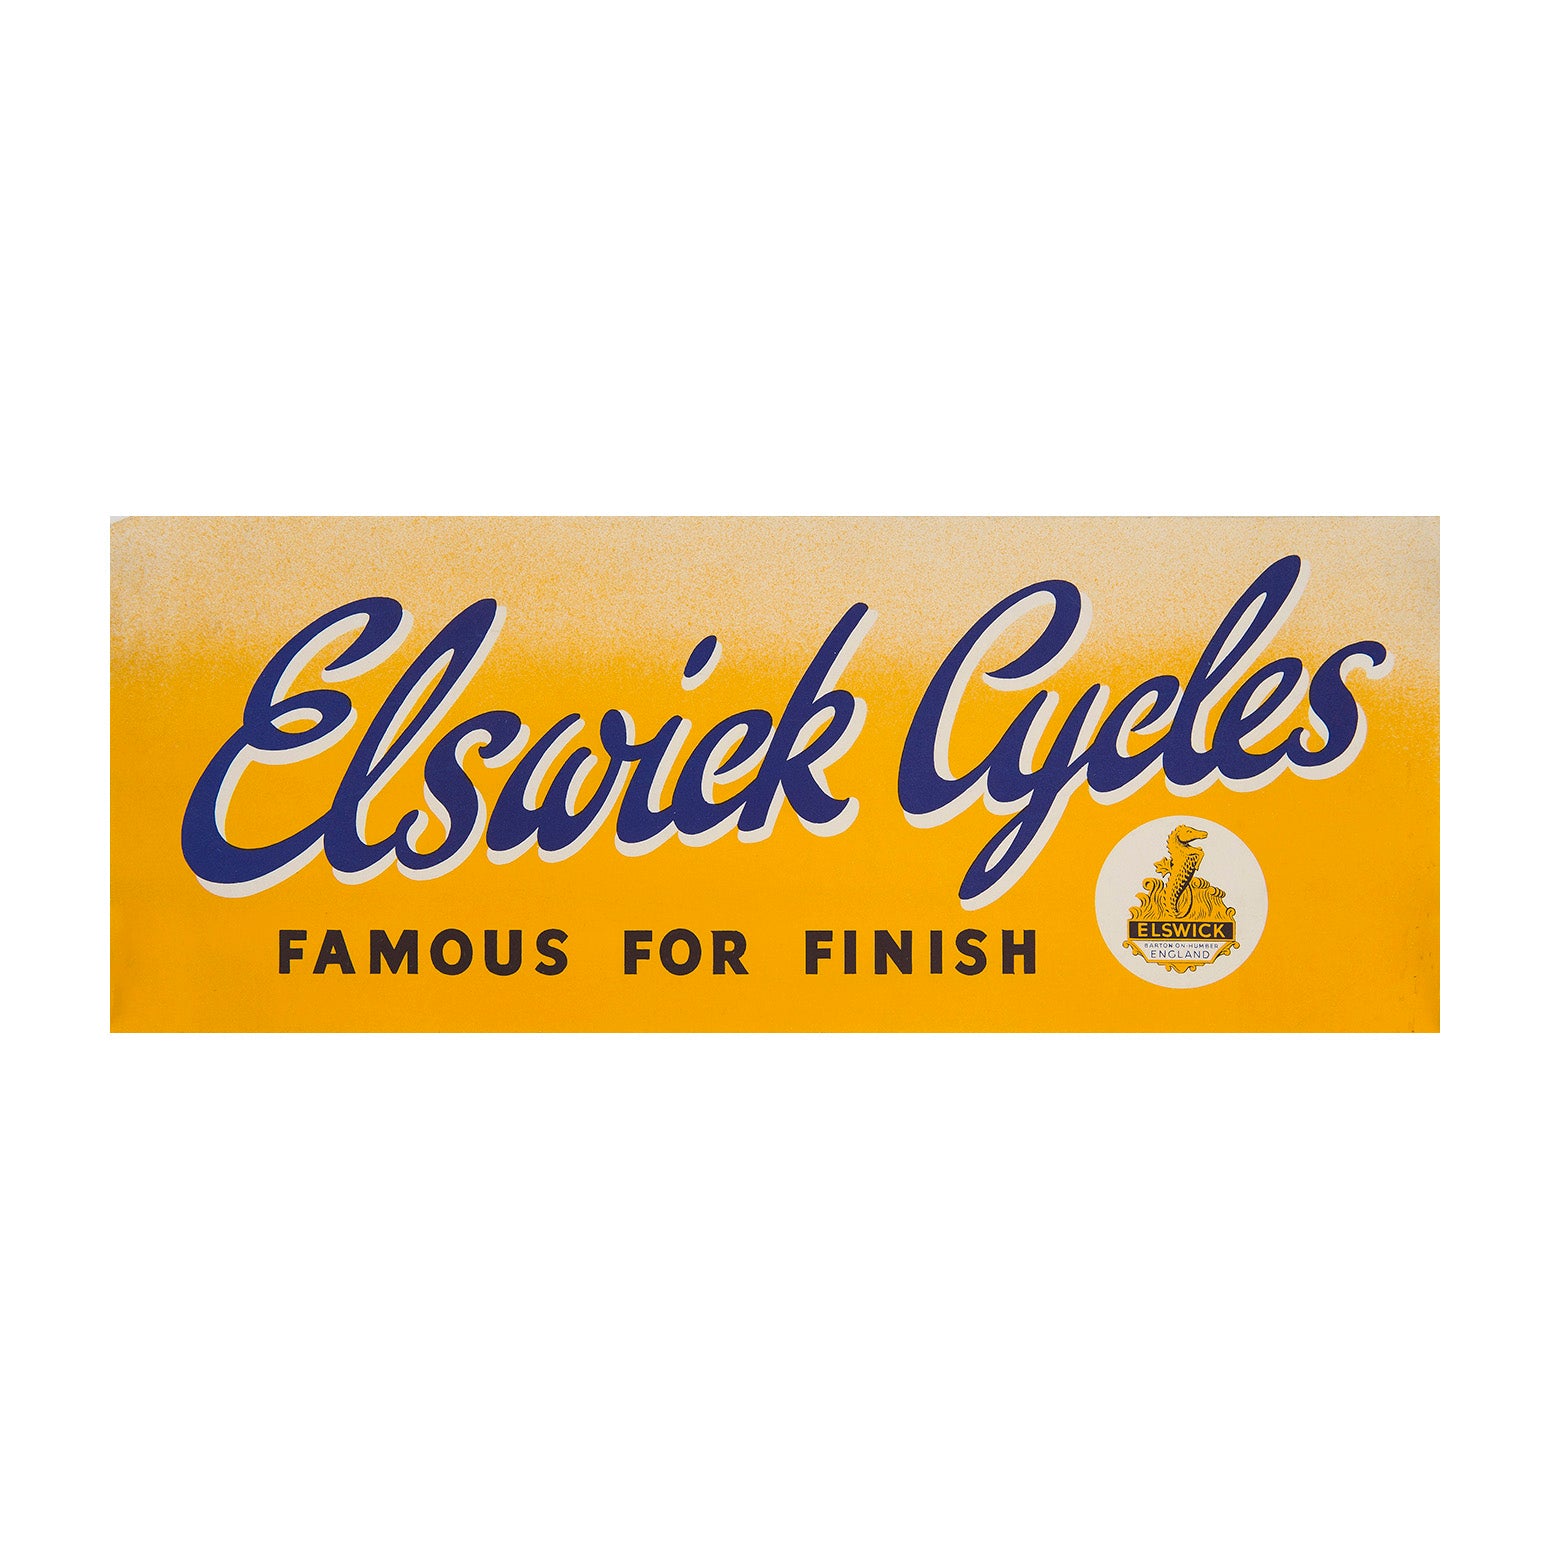 Elswick Cycles. Famous for Finish